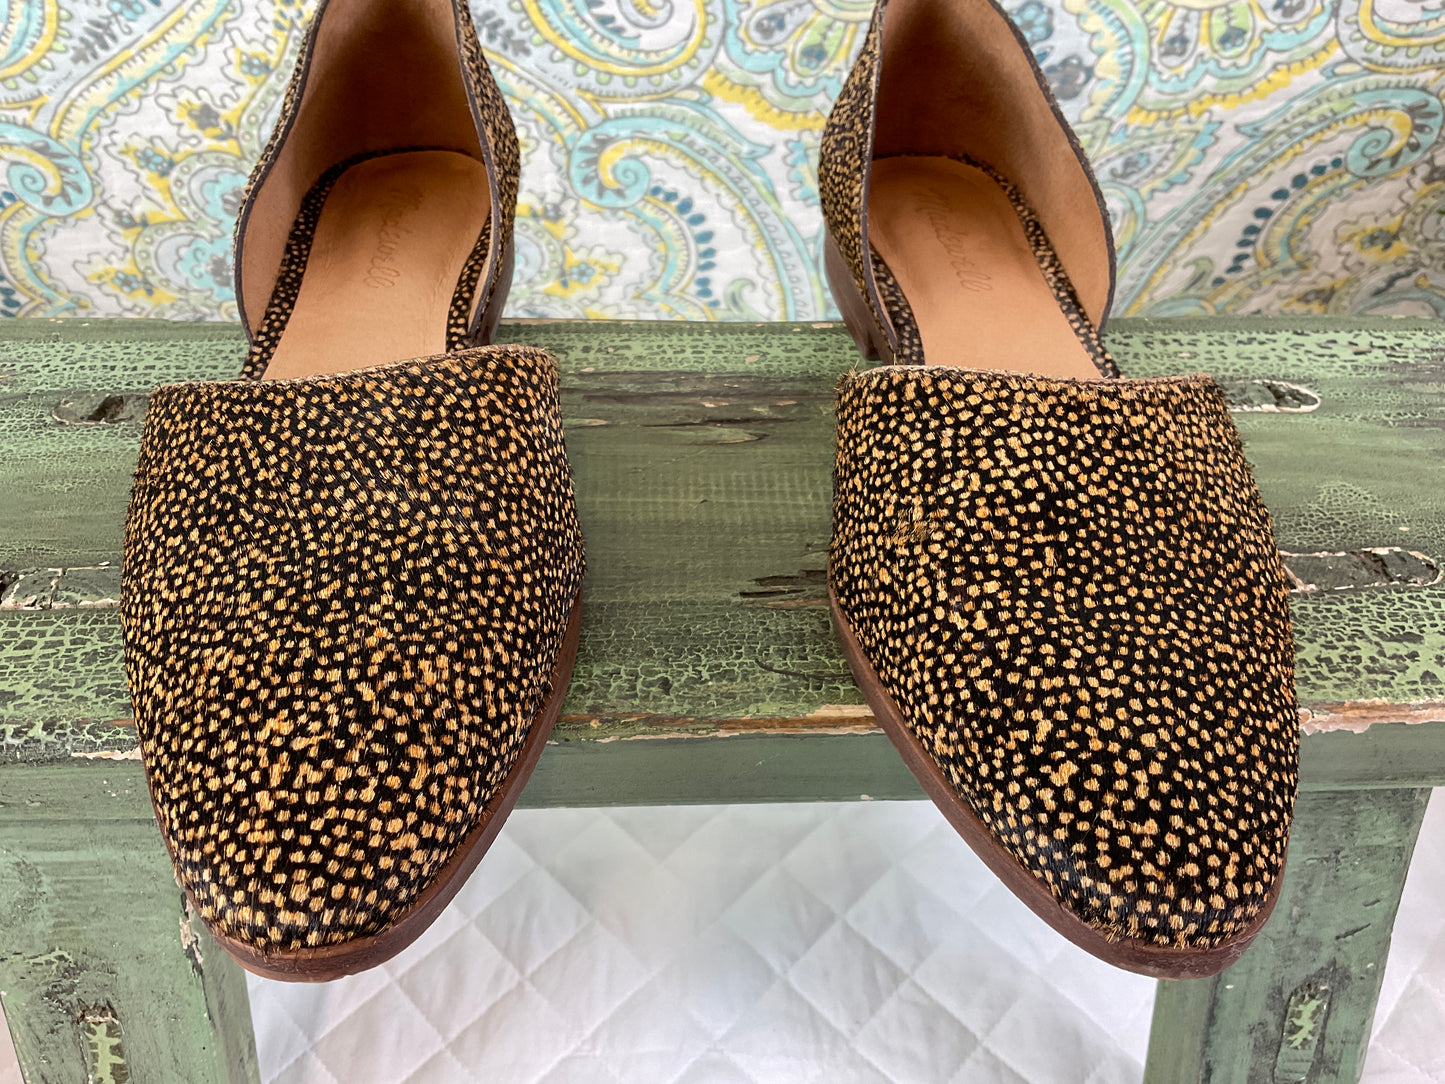 Madewell Marisa d'Orsay Flat in Spotted Calf Hair, Size 8.5